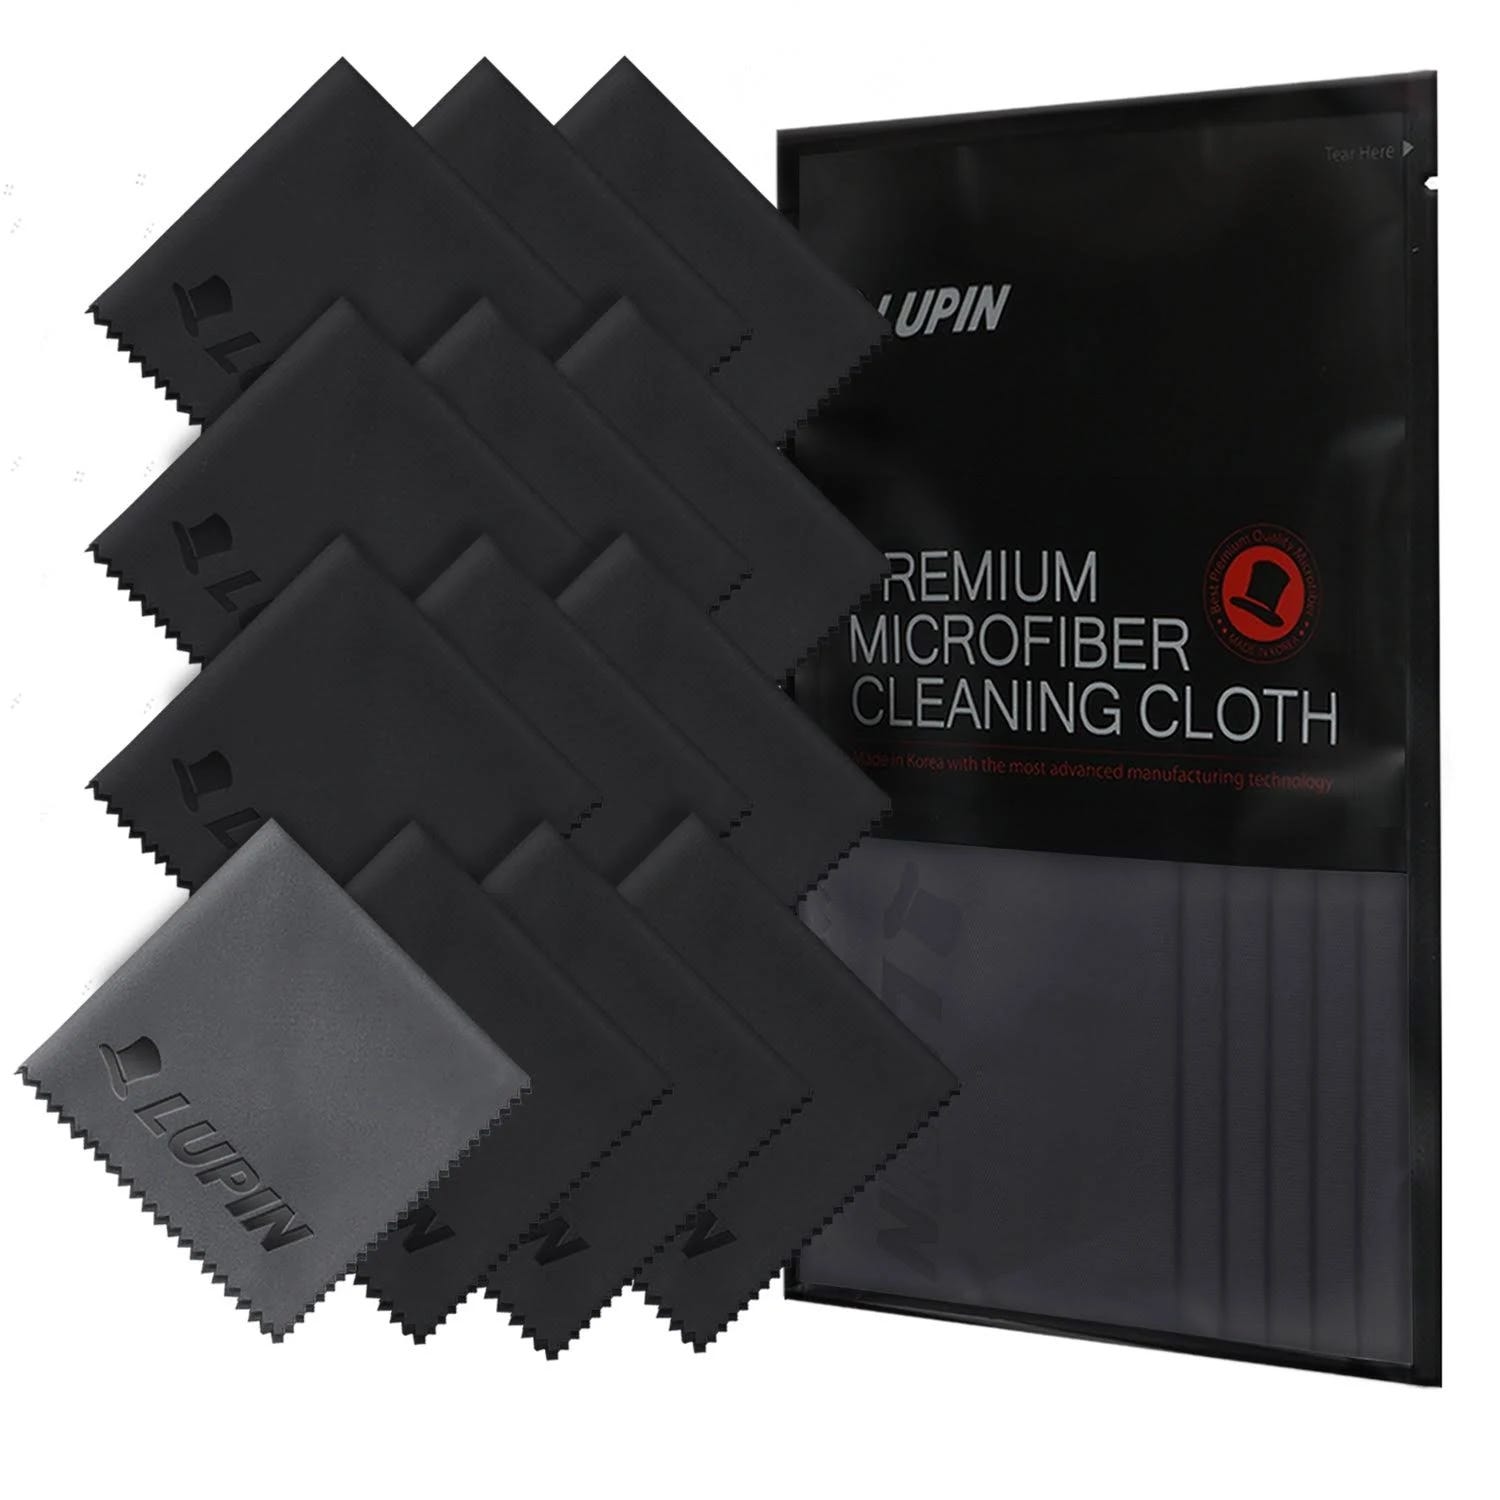 Lupin 13 Premium Microfiber Multi-Surface Cleaning Cloths | Image